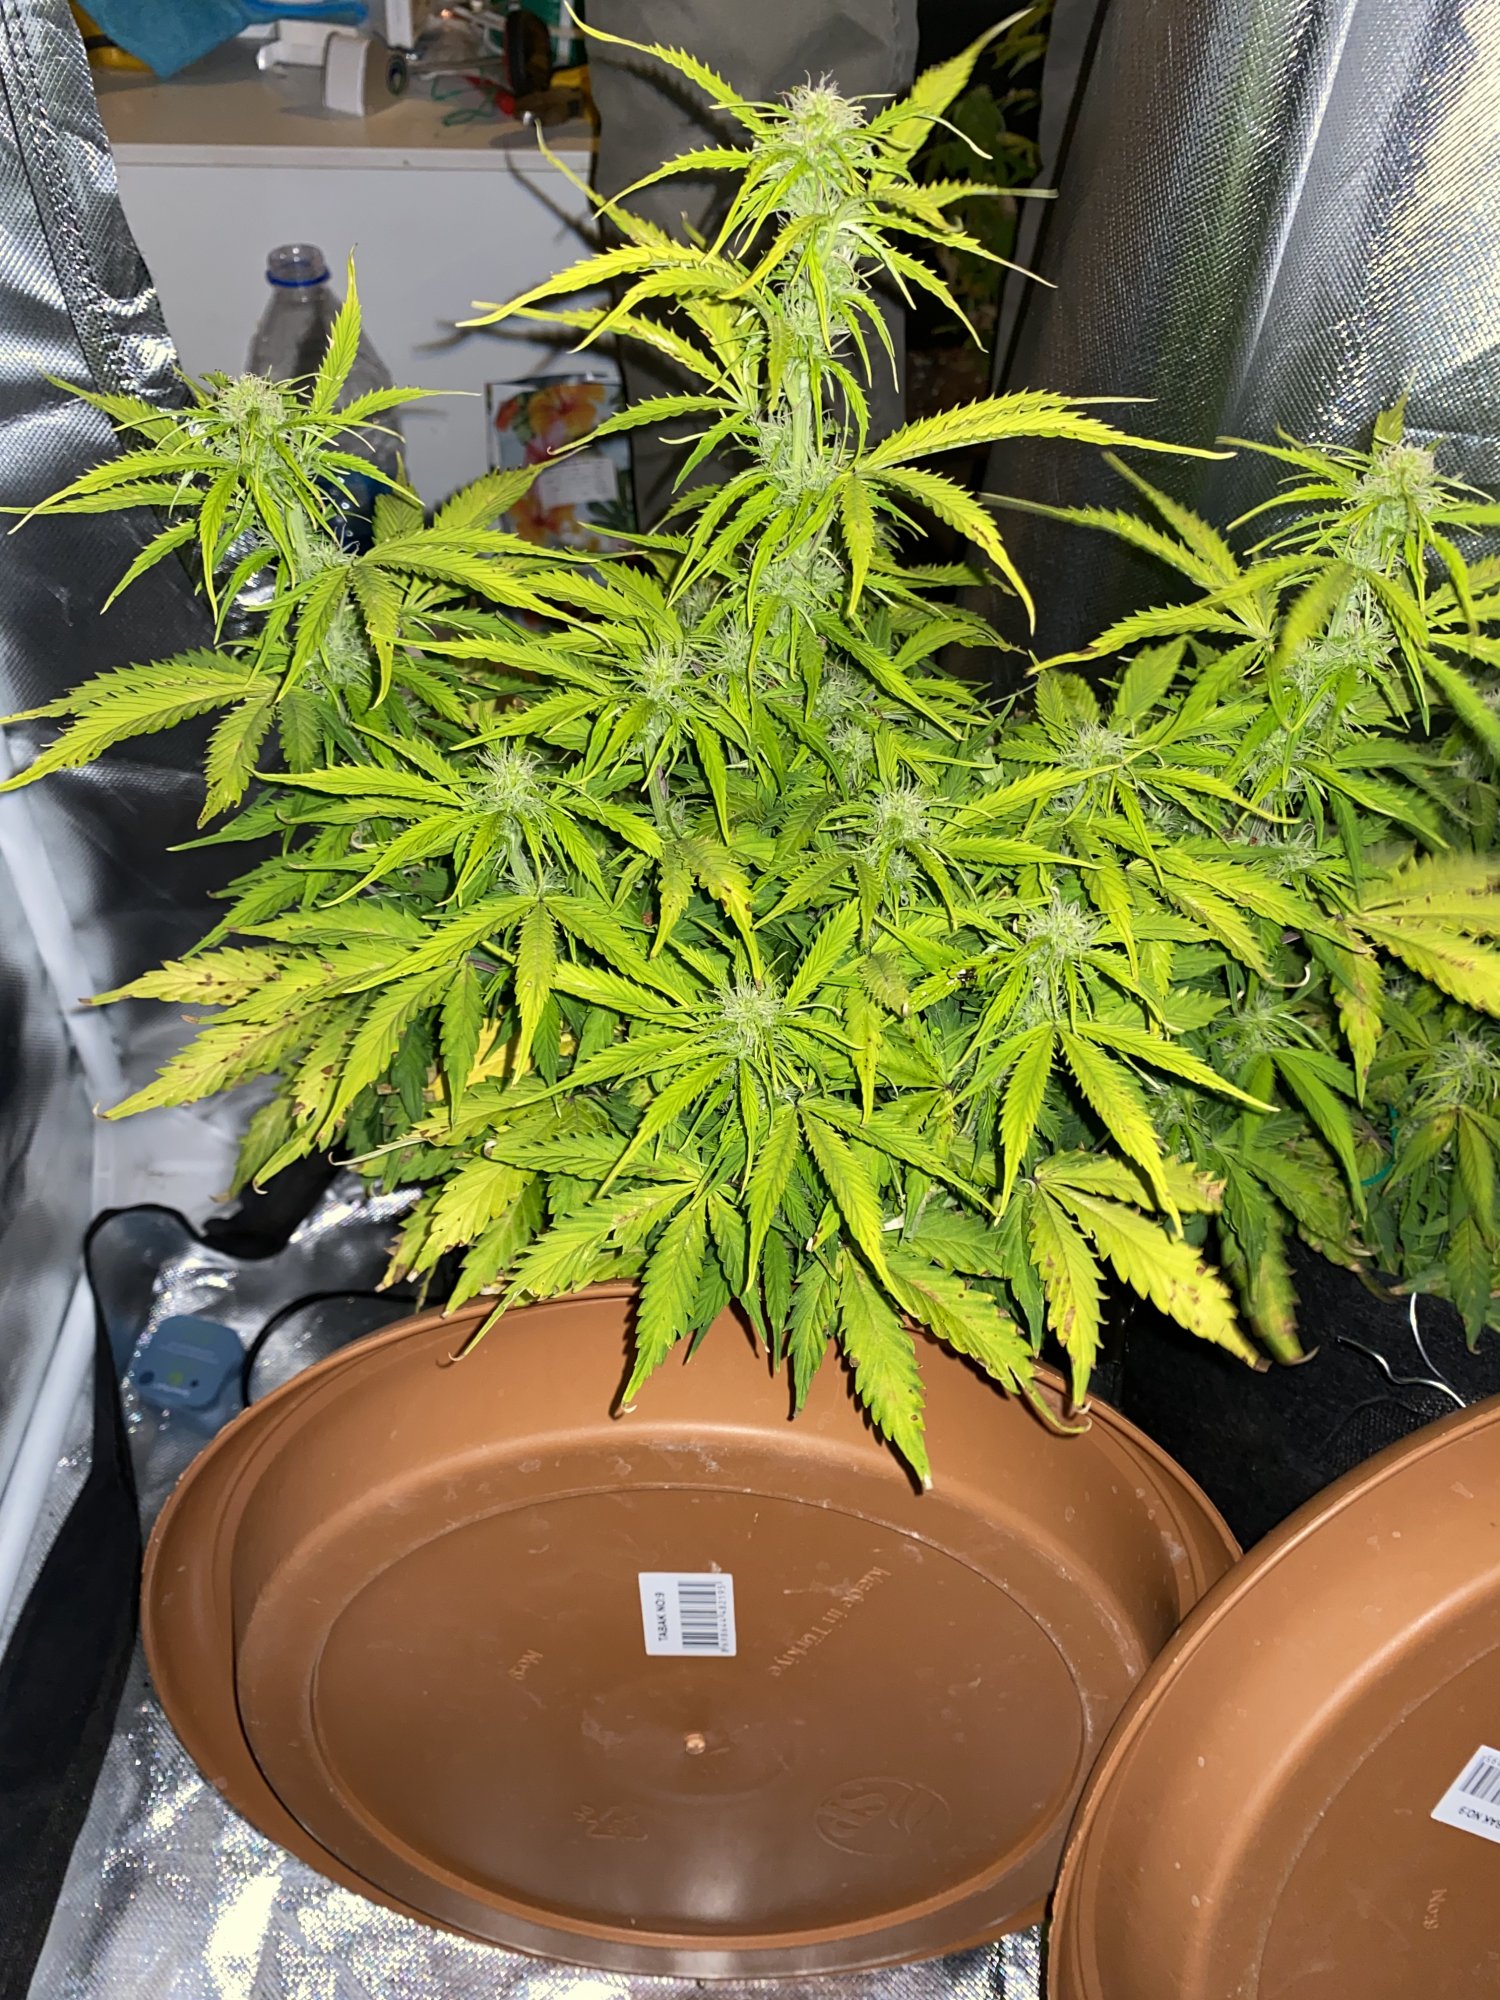 This is my autoflower nl at week 8 what kind of deficiency can you see